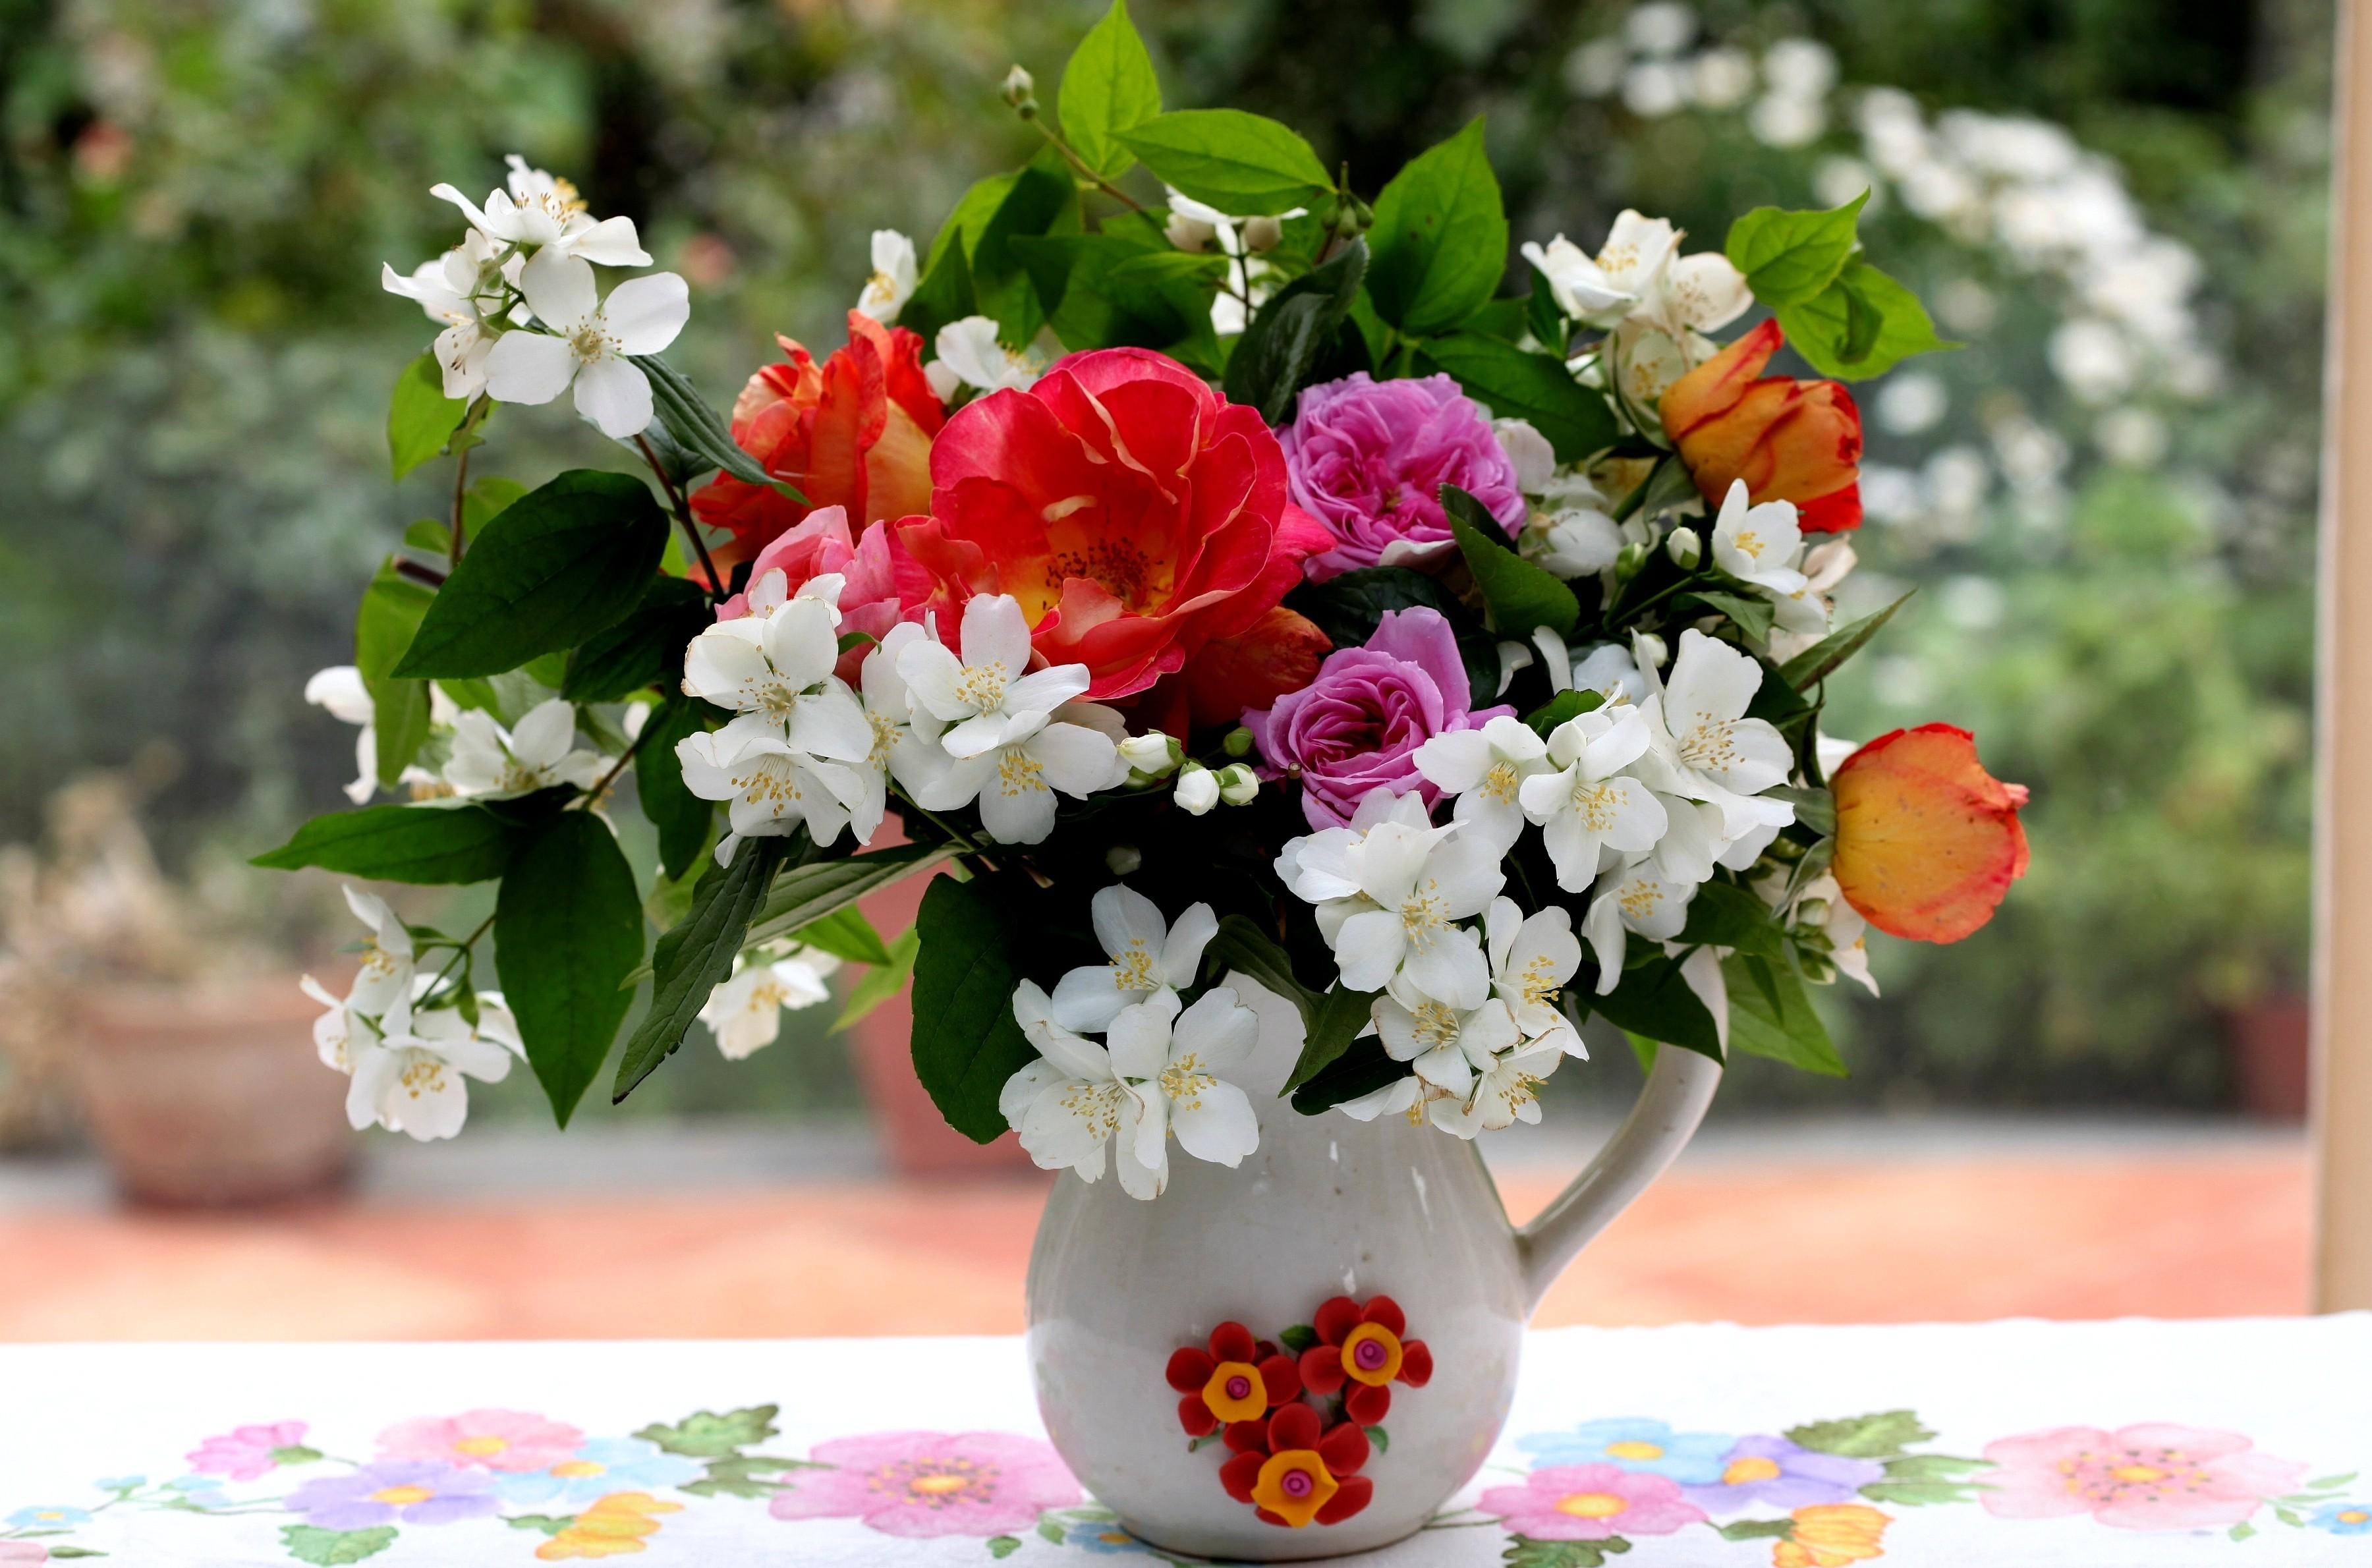 roses, flowers, leaves, branches, bouquet, jug, table, jasmine